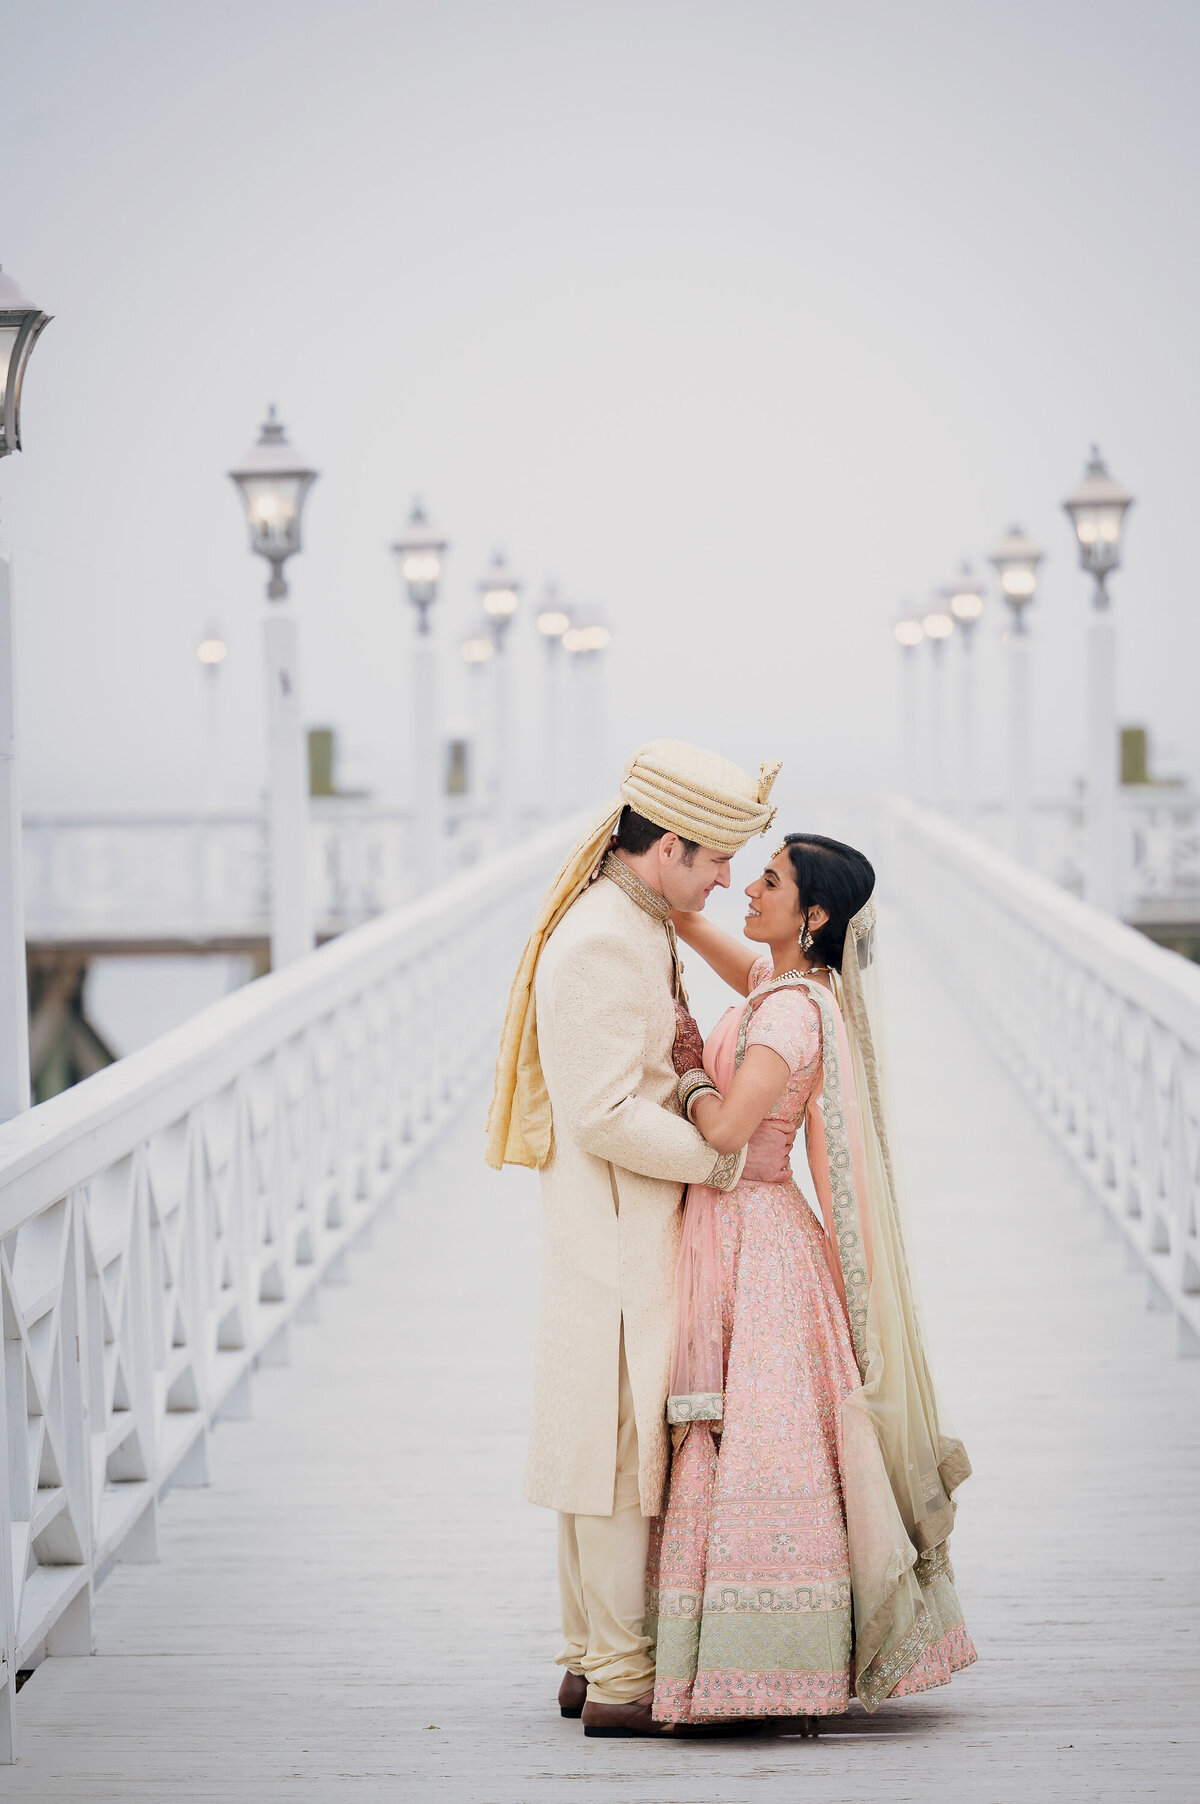 Looking for a Sikh wedding photographer in NJ? Ishan Fotografi is an Indian wedding photography studio that can help!